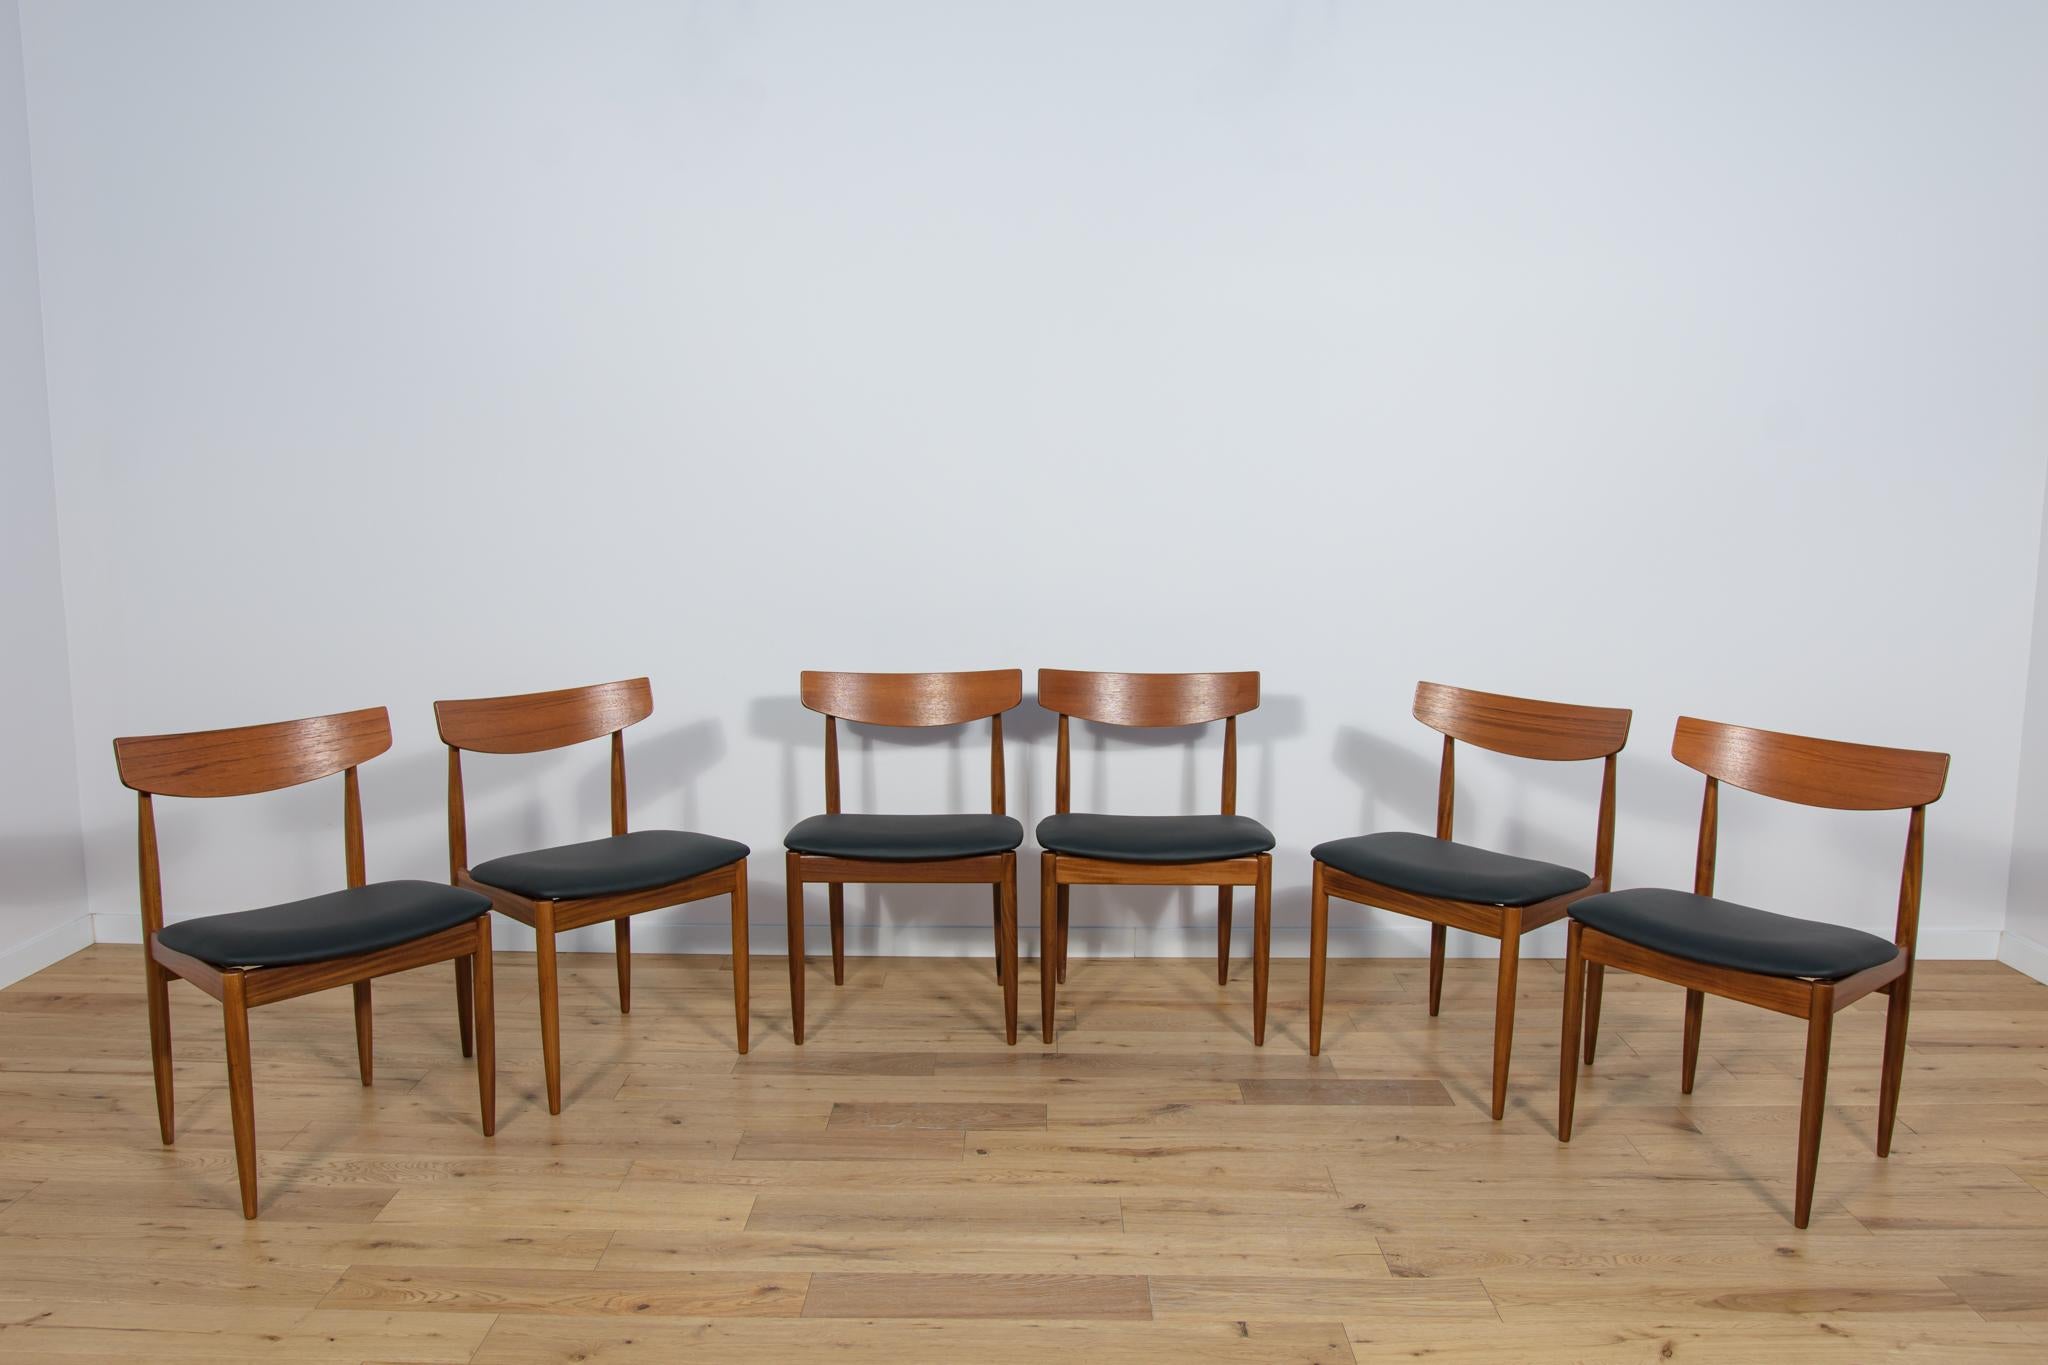 Woodwork Mid-Century Dining Chairs in Teak by Ib Kofod Larsen for G-Plan, 1960s. For Sale